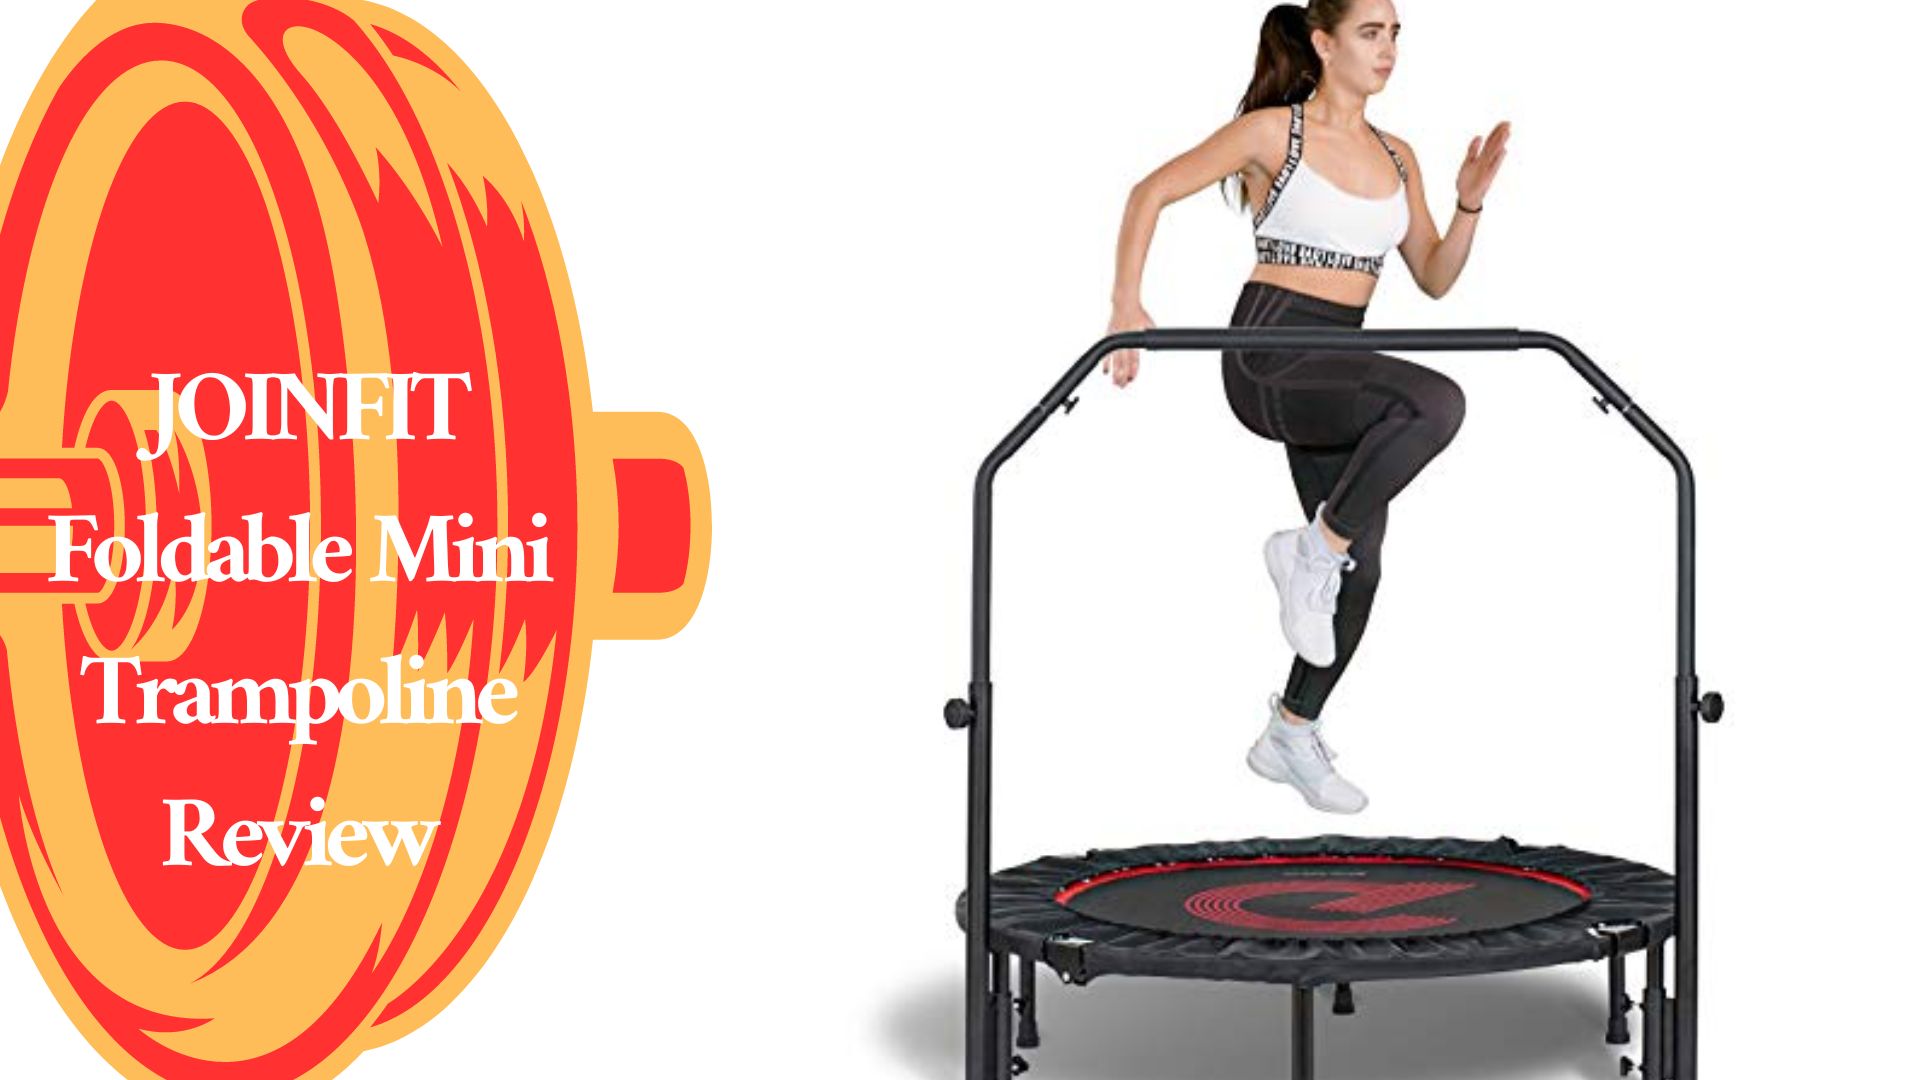 JOINFIT Foldable Mini Trampoline Review